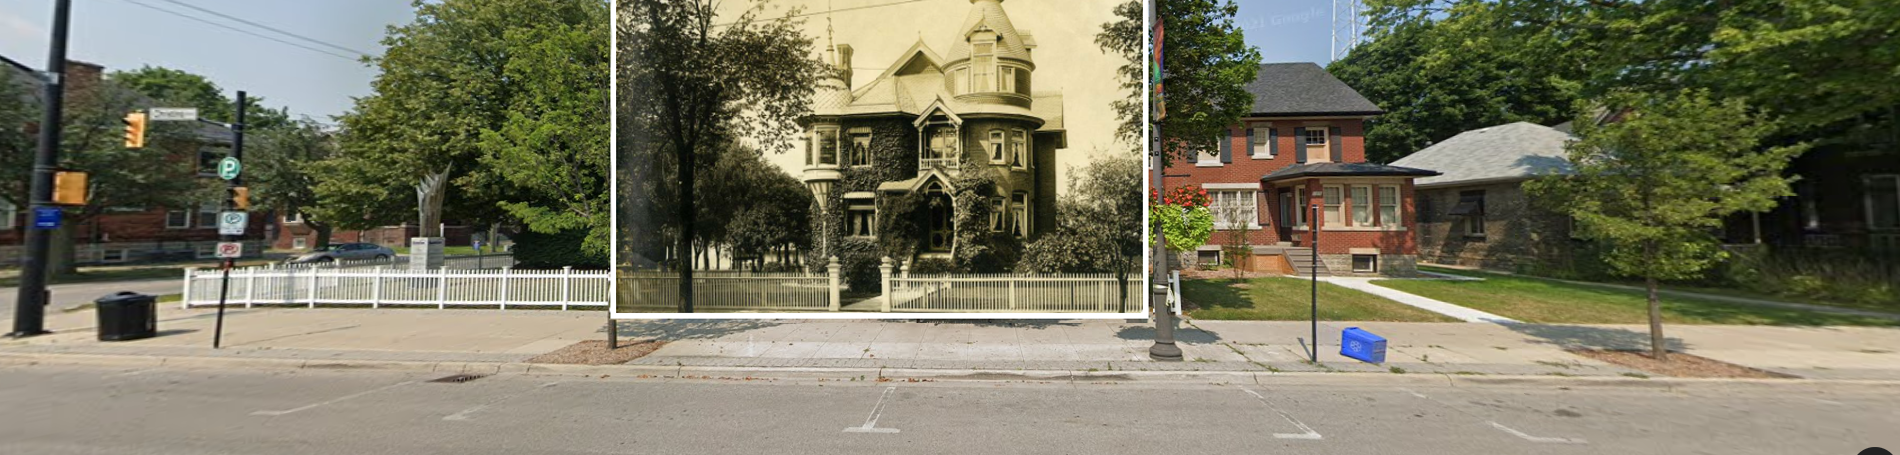 Photo of an old house in Sarnia overlaid on Google Maps using History Pin.